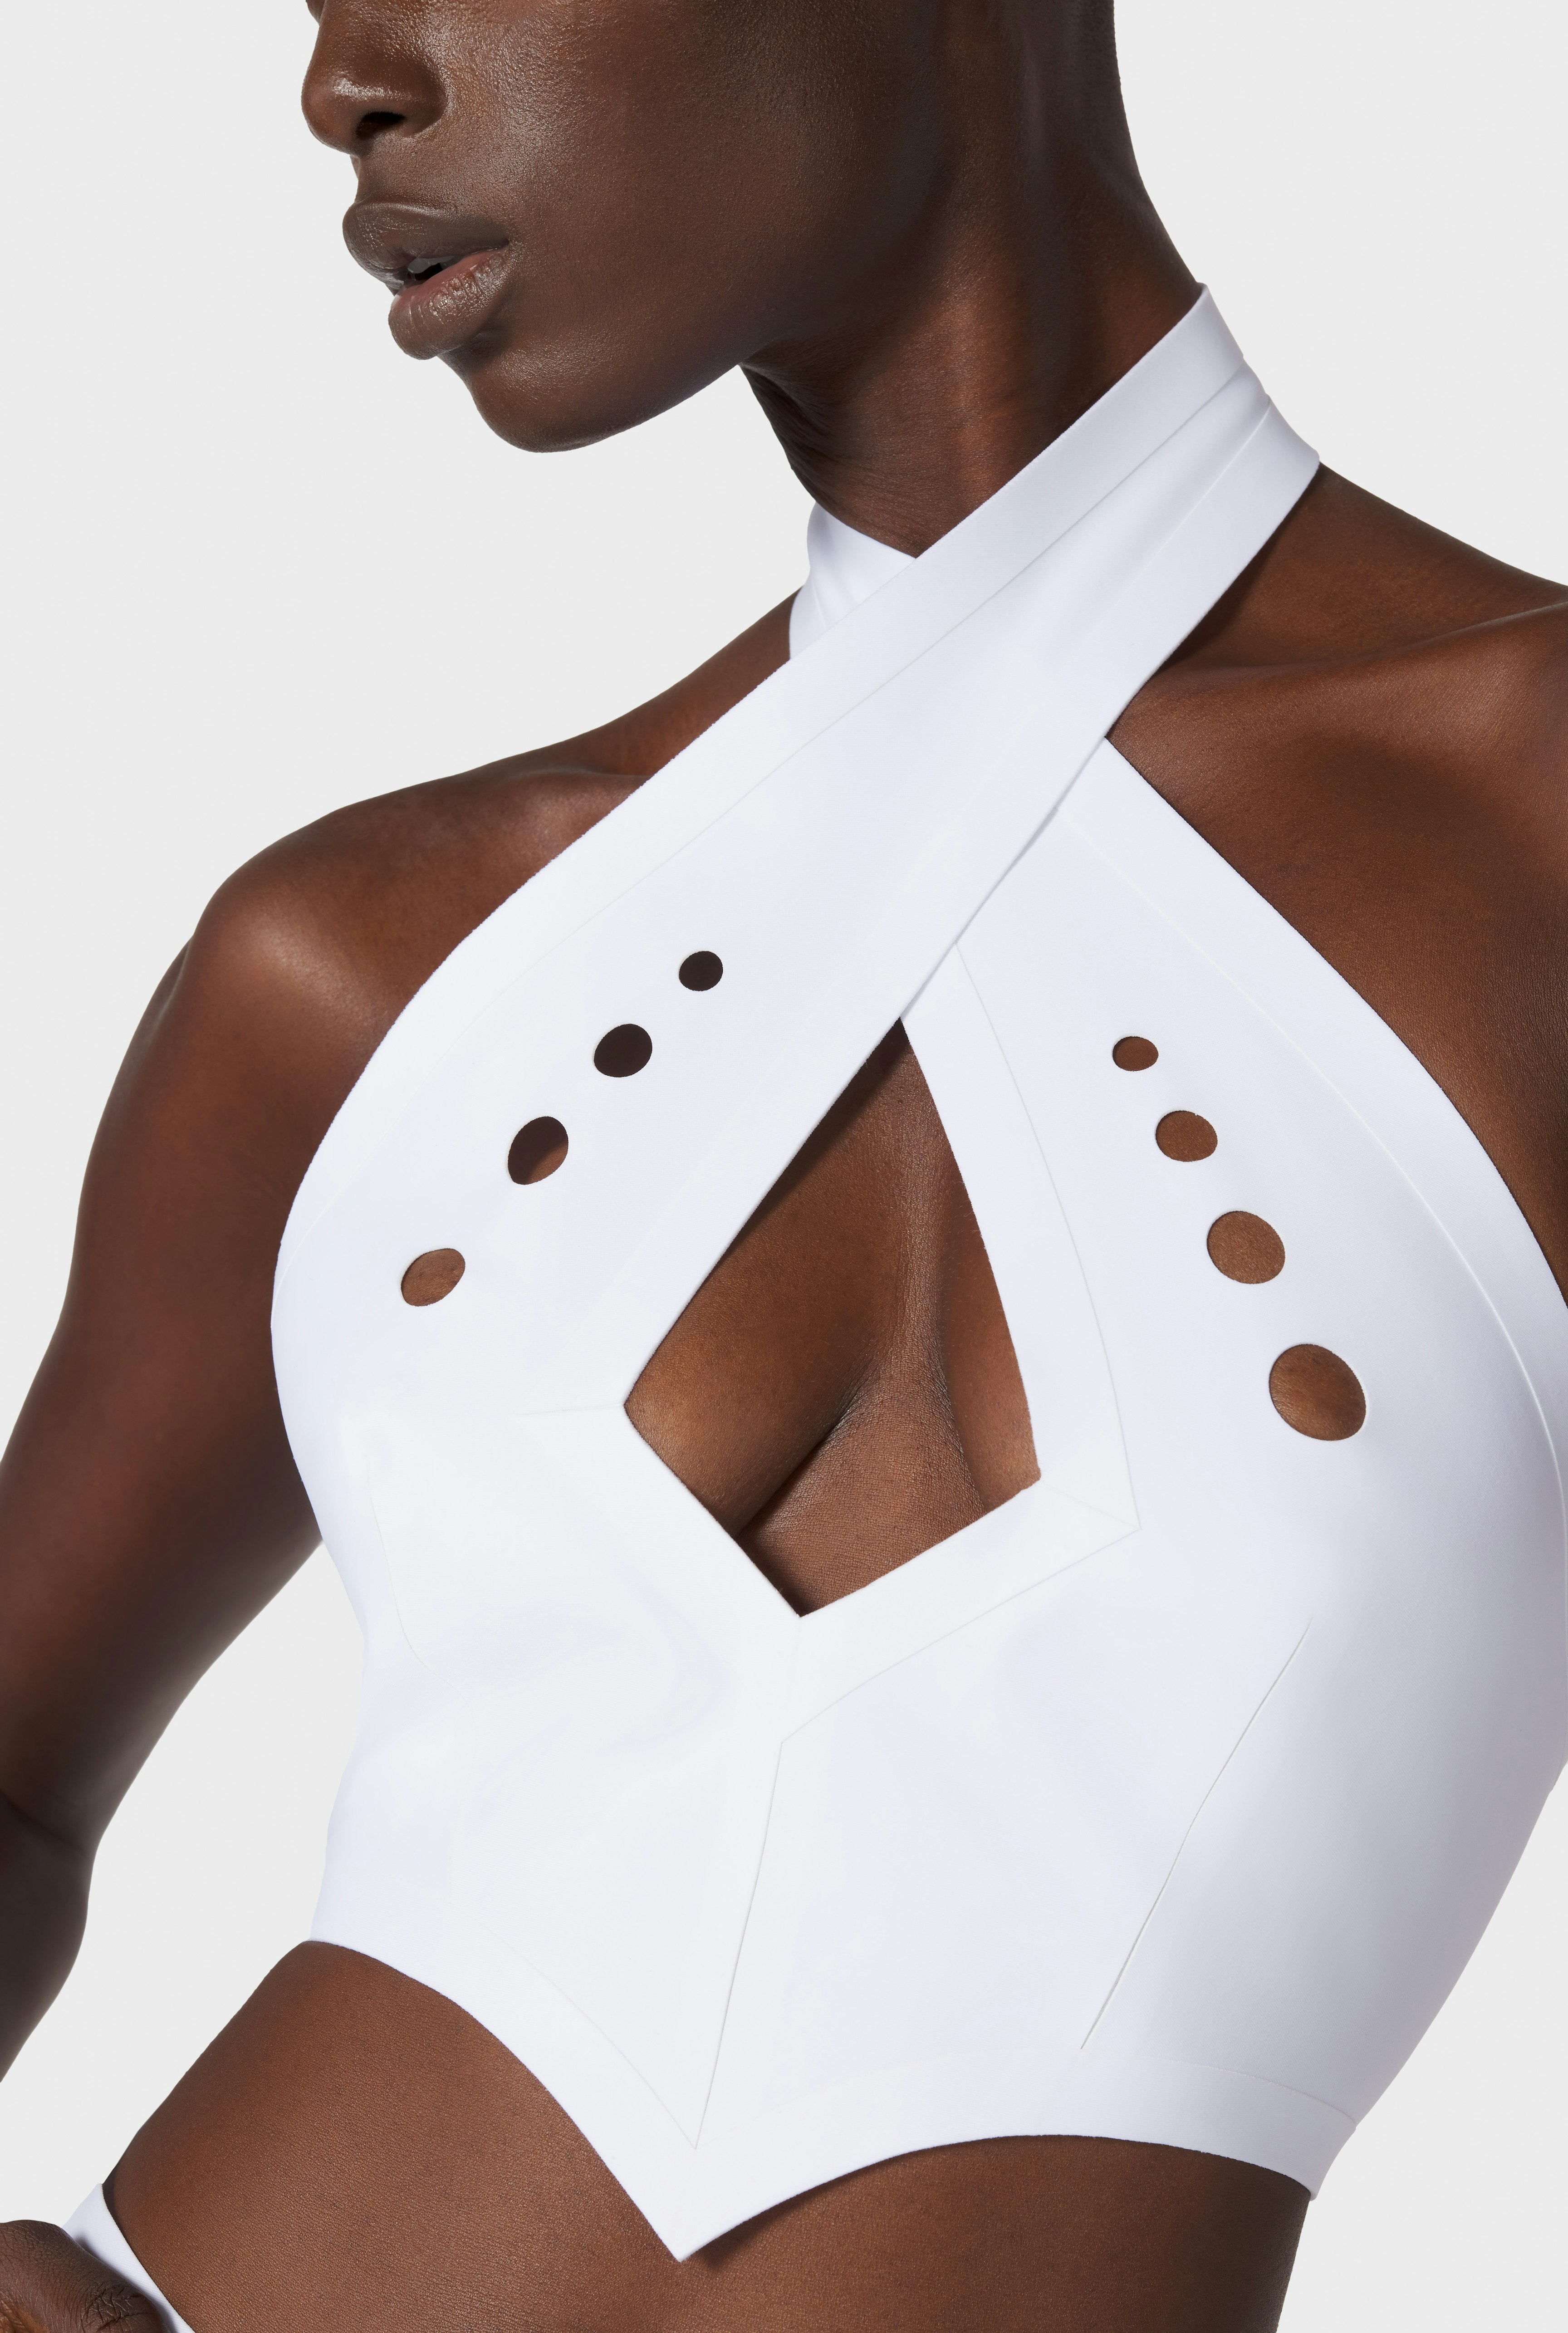 The White Perforated Crop Top